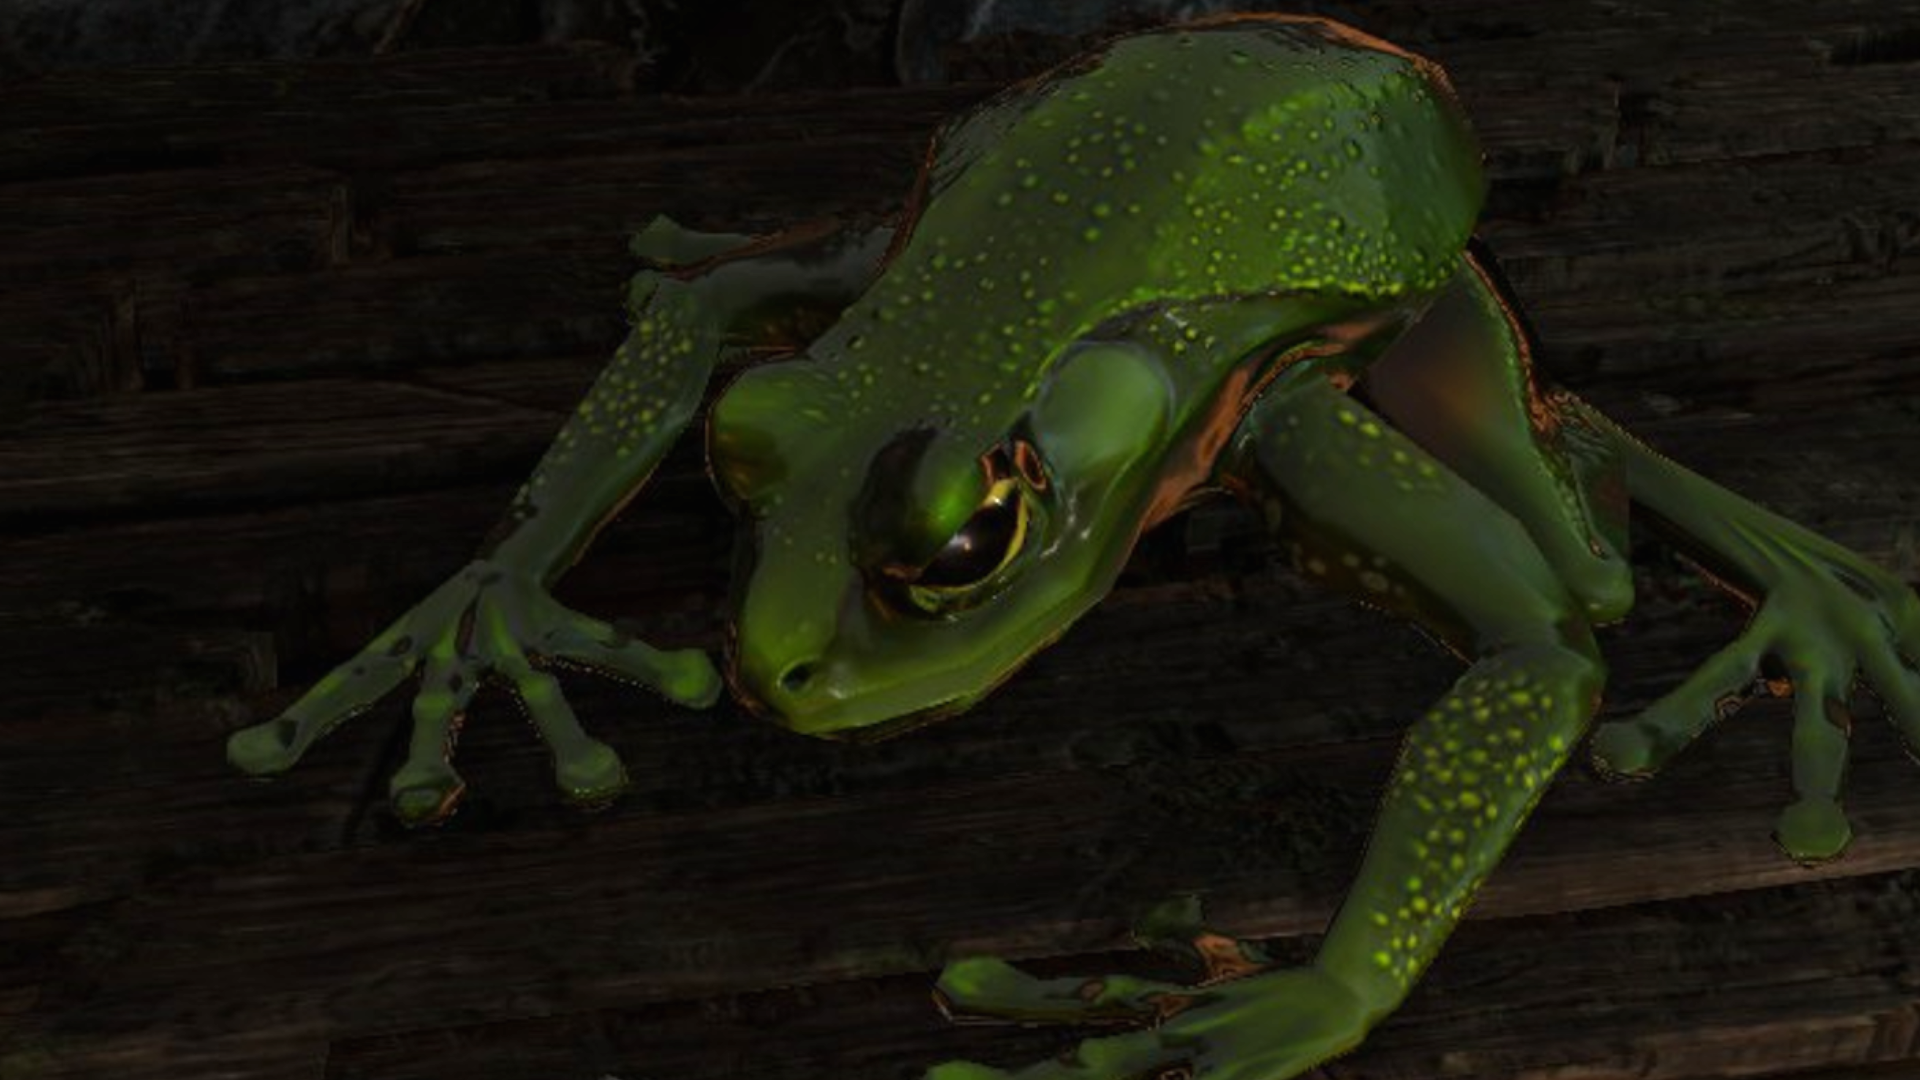 An amphibian from Divinity: Original Sin 2, a froglike creature lurking in the shadows of a cave.